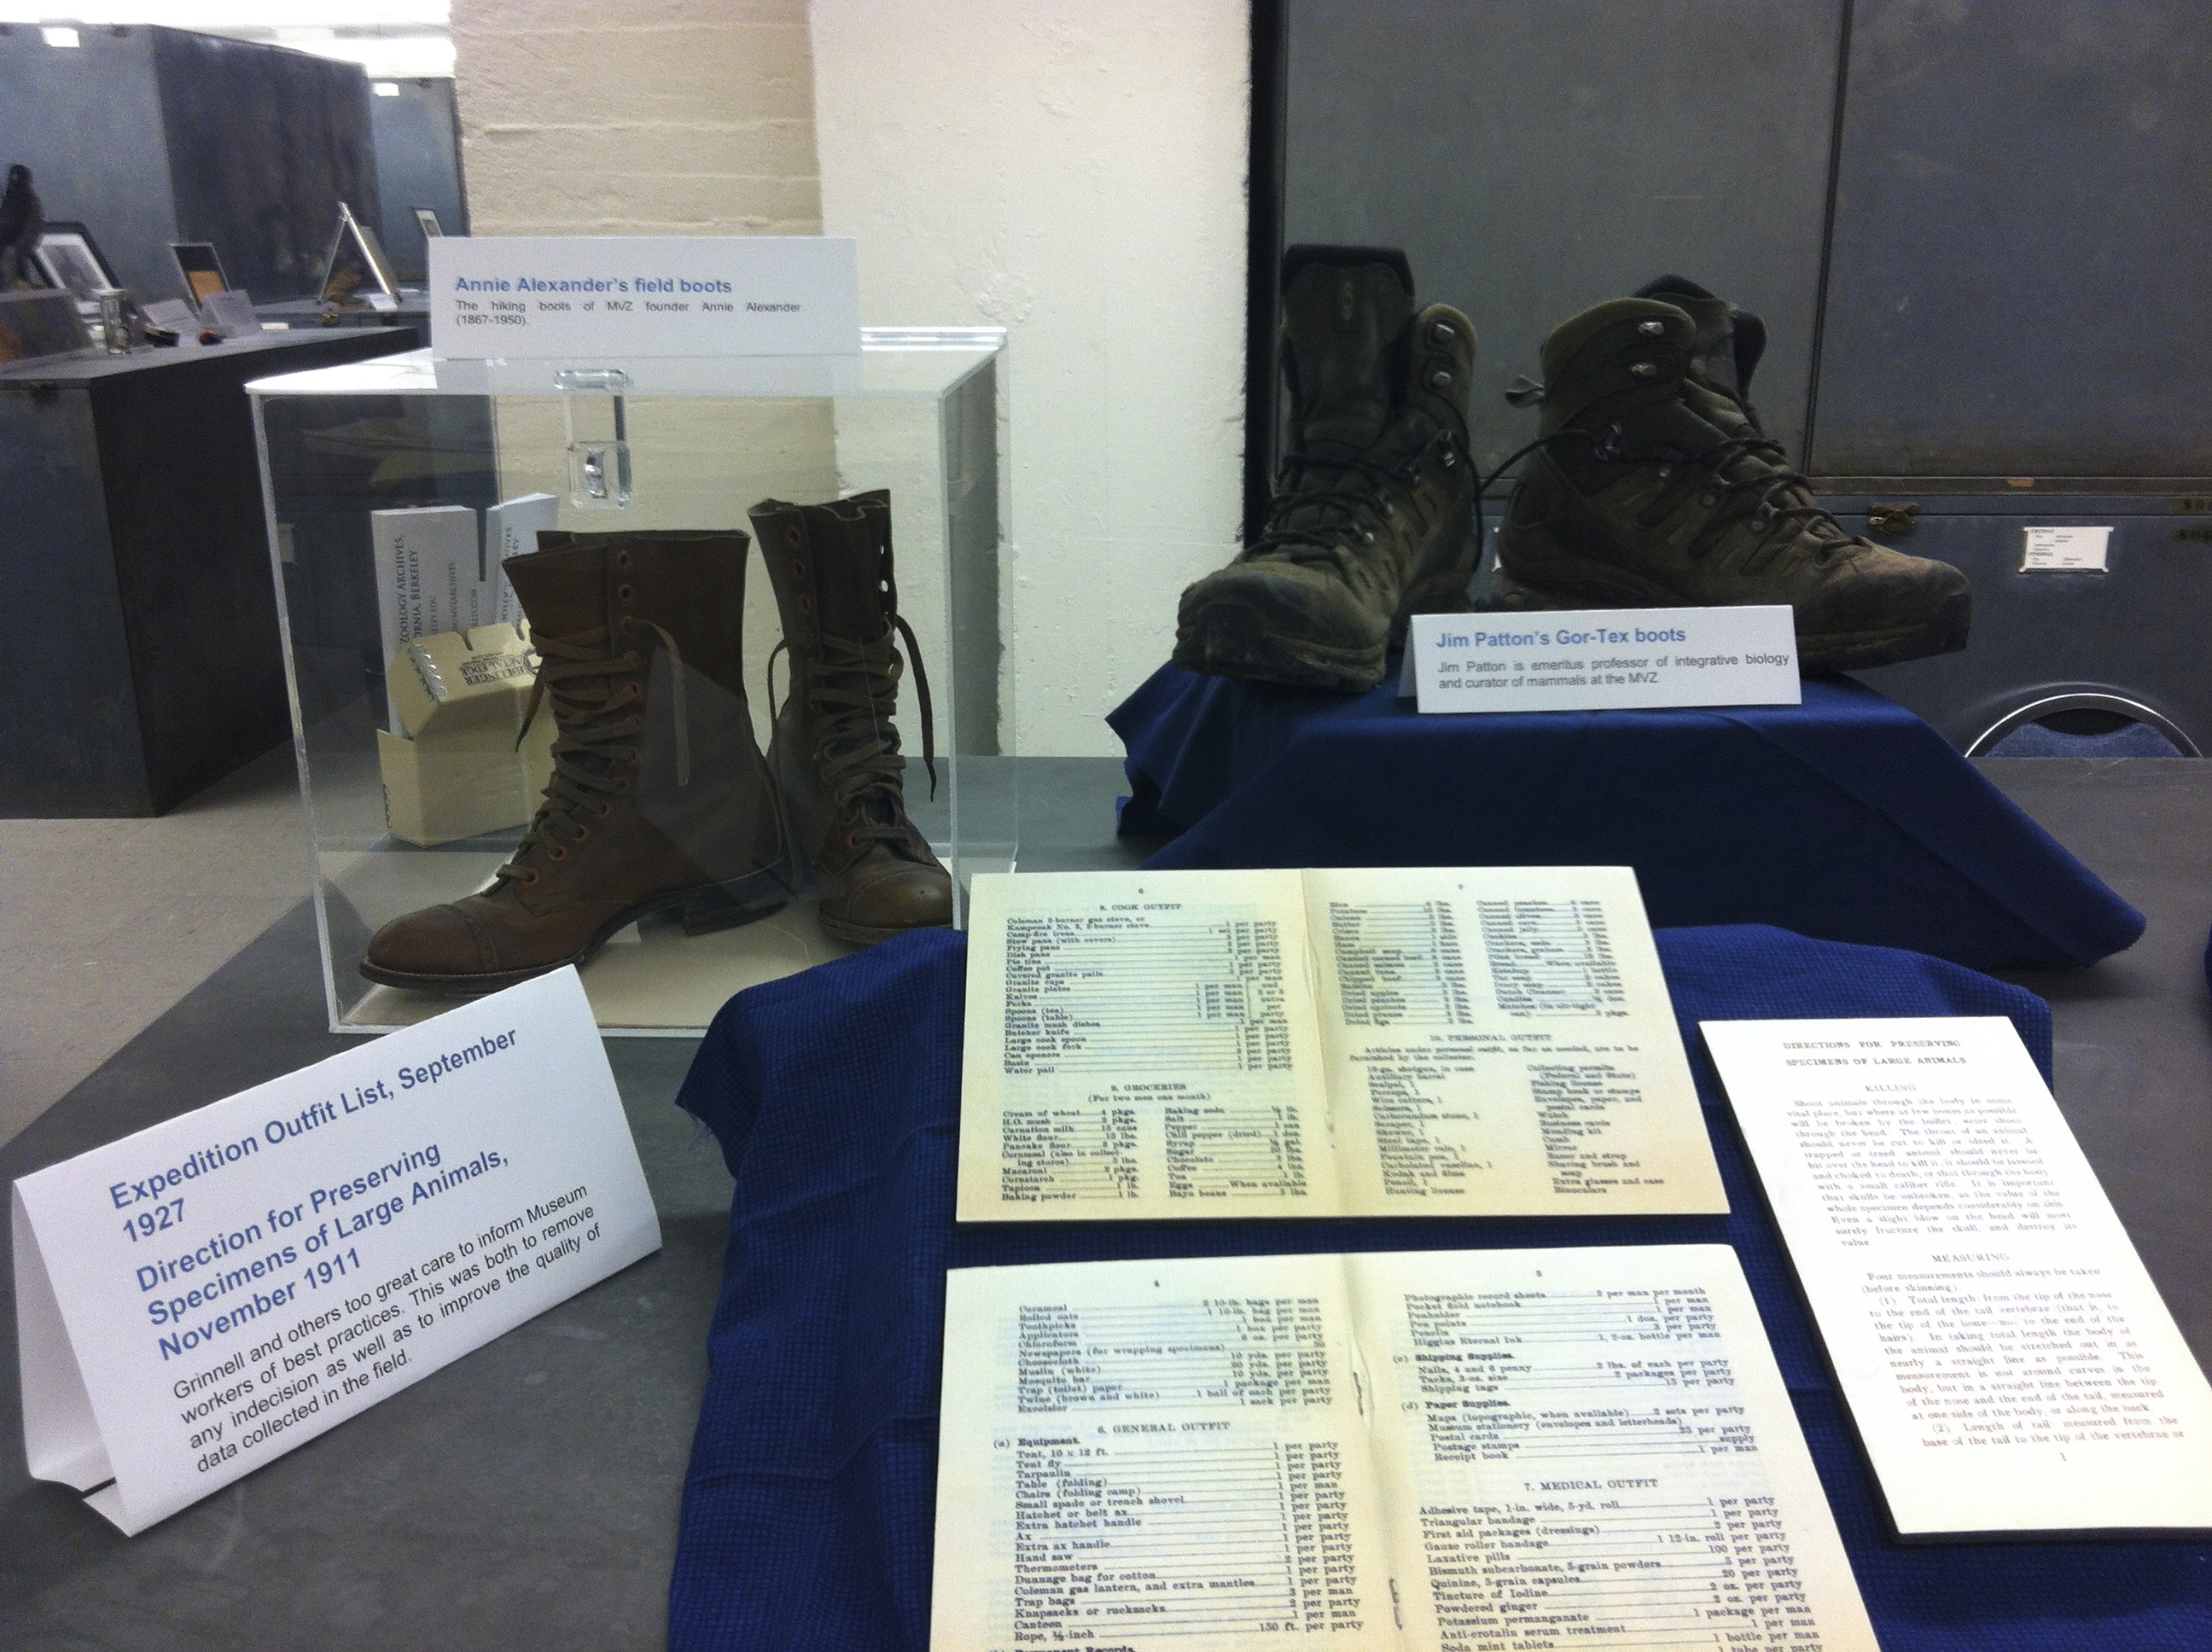 Annie Alexander's hiking boots and the hiking boots of Jim Patton, emeritus professor of integrative biology and curator of mammals at the MVZ, sit at the back of the display. An expedition outfit list from 1927 and a page from 1911's "Direction for Preserving Specimens of Large Mammals" are displayed in the foreground.